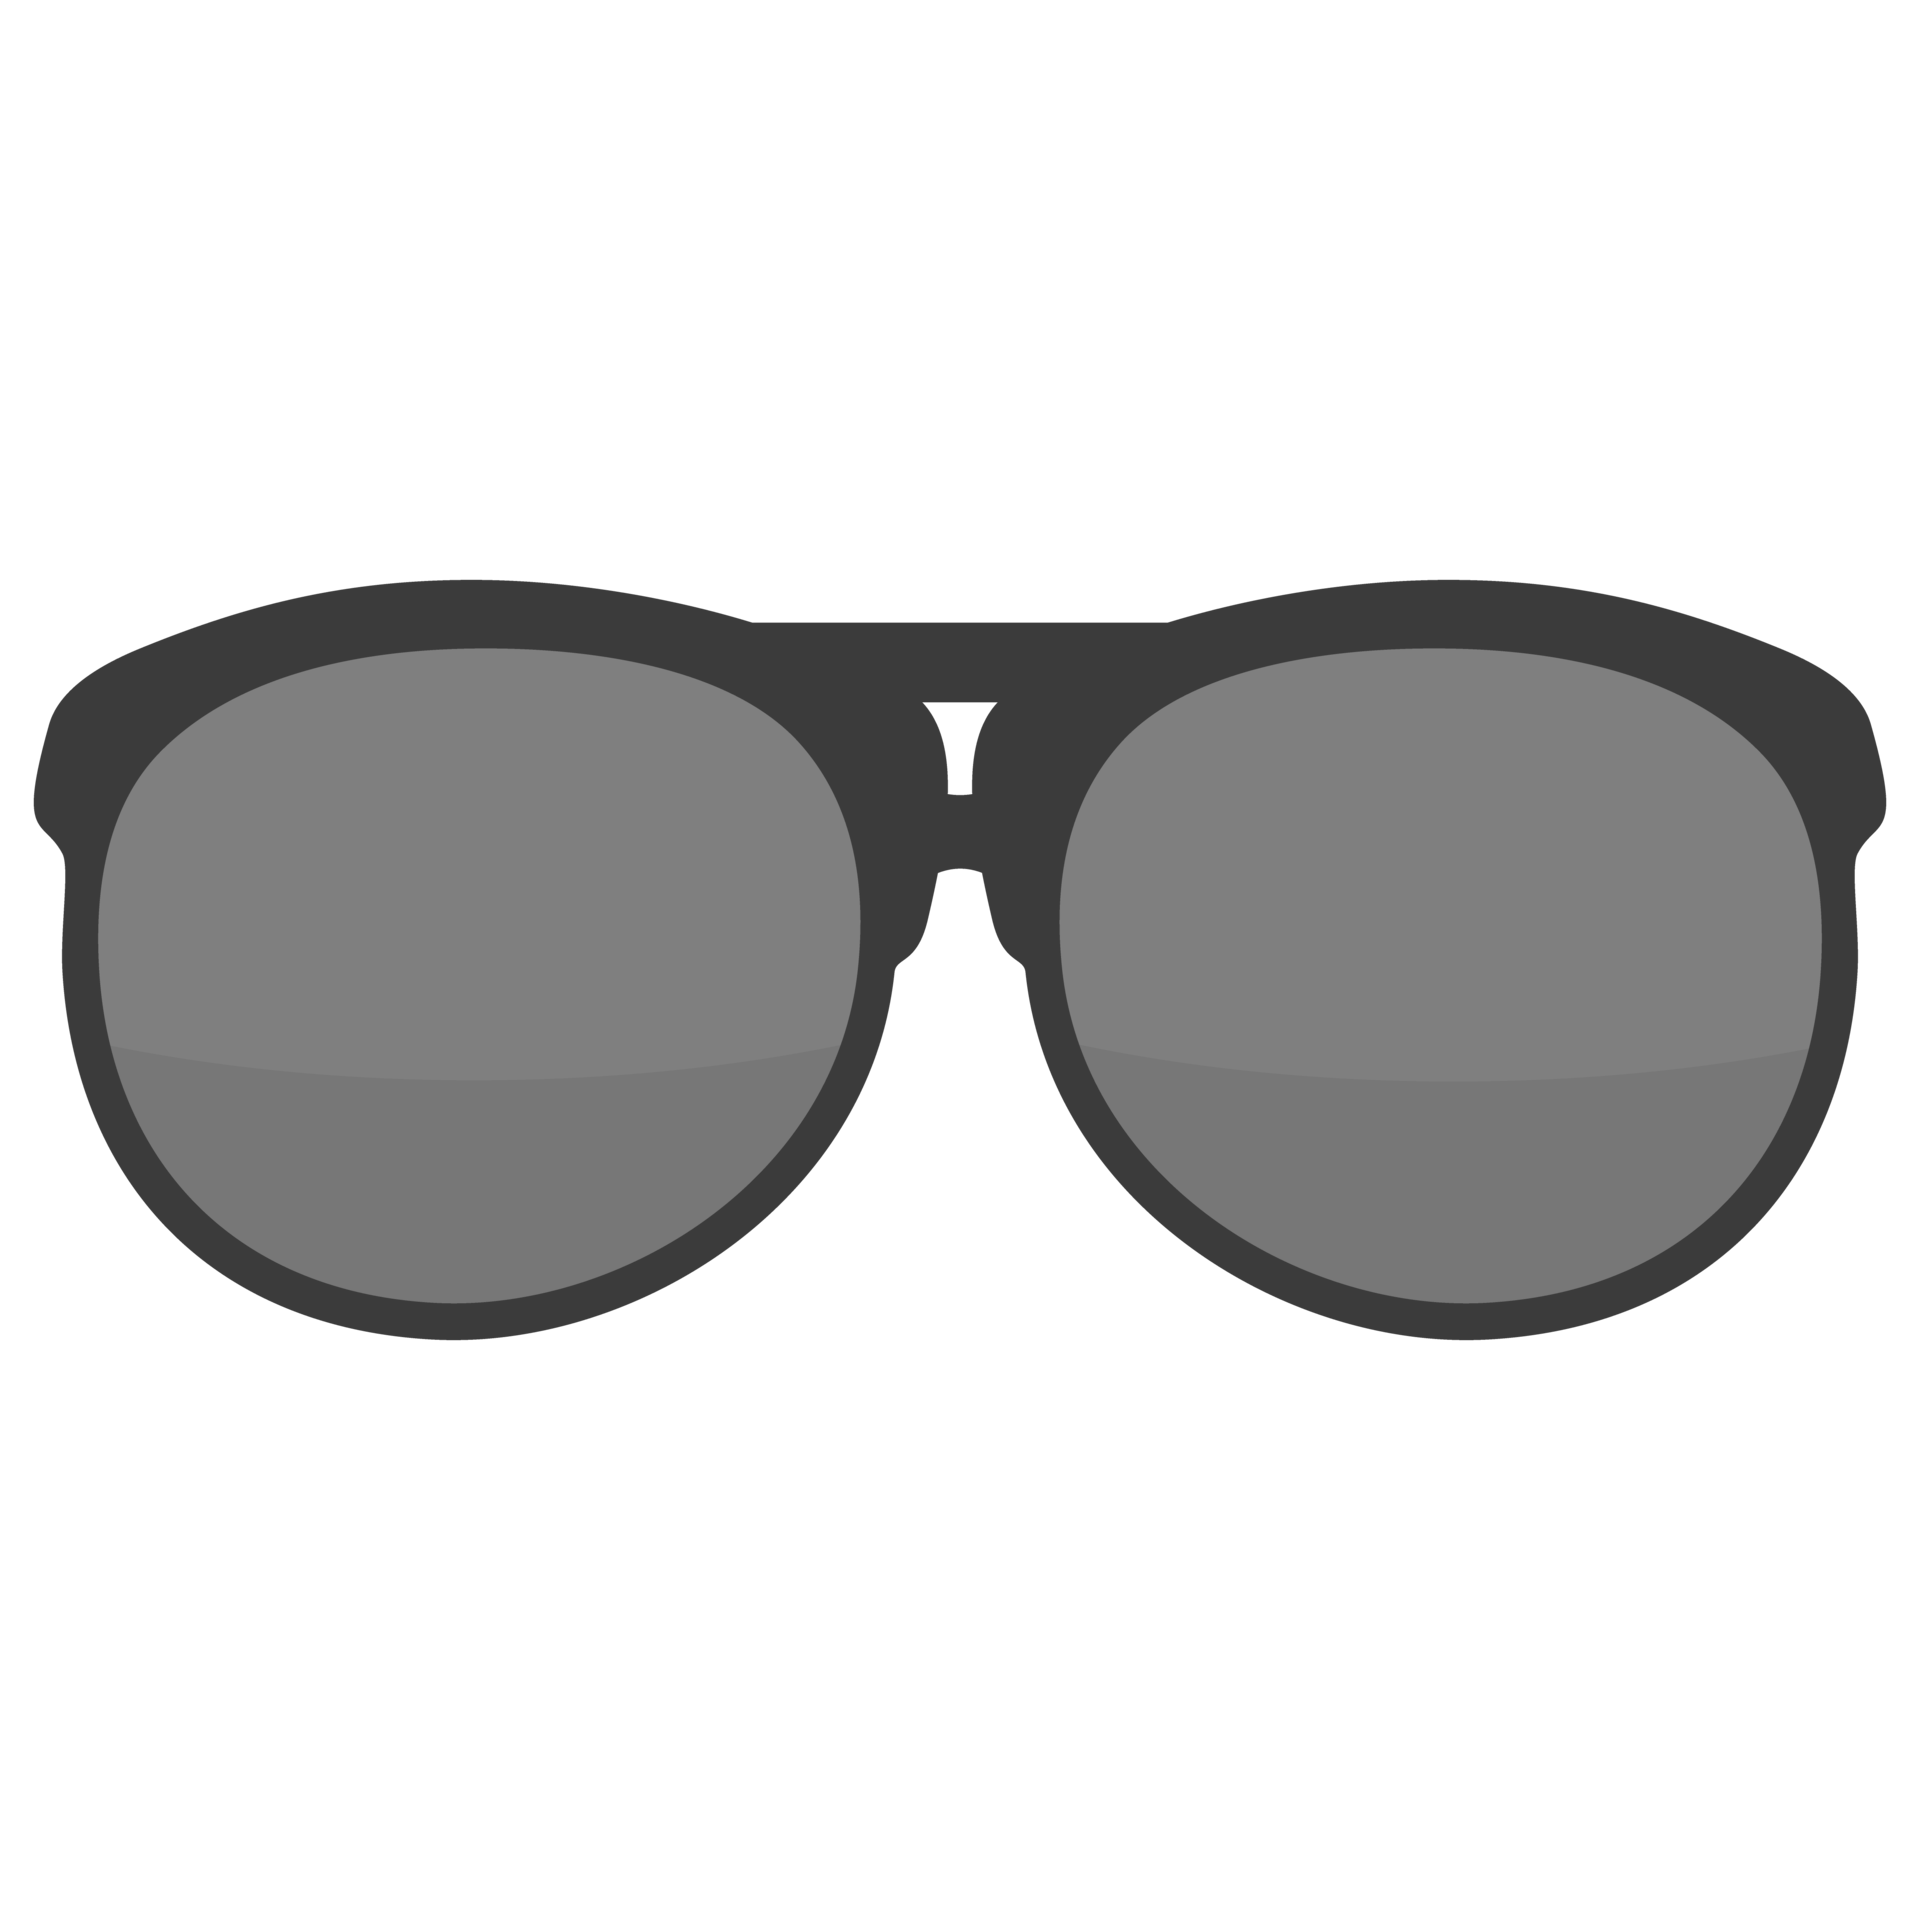 Free illustration of glasses icon 13743336 PNG with Transparent Background